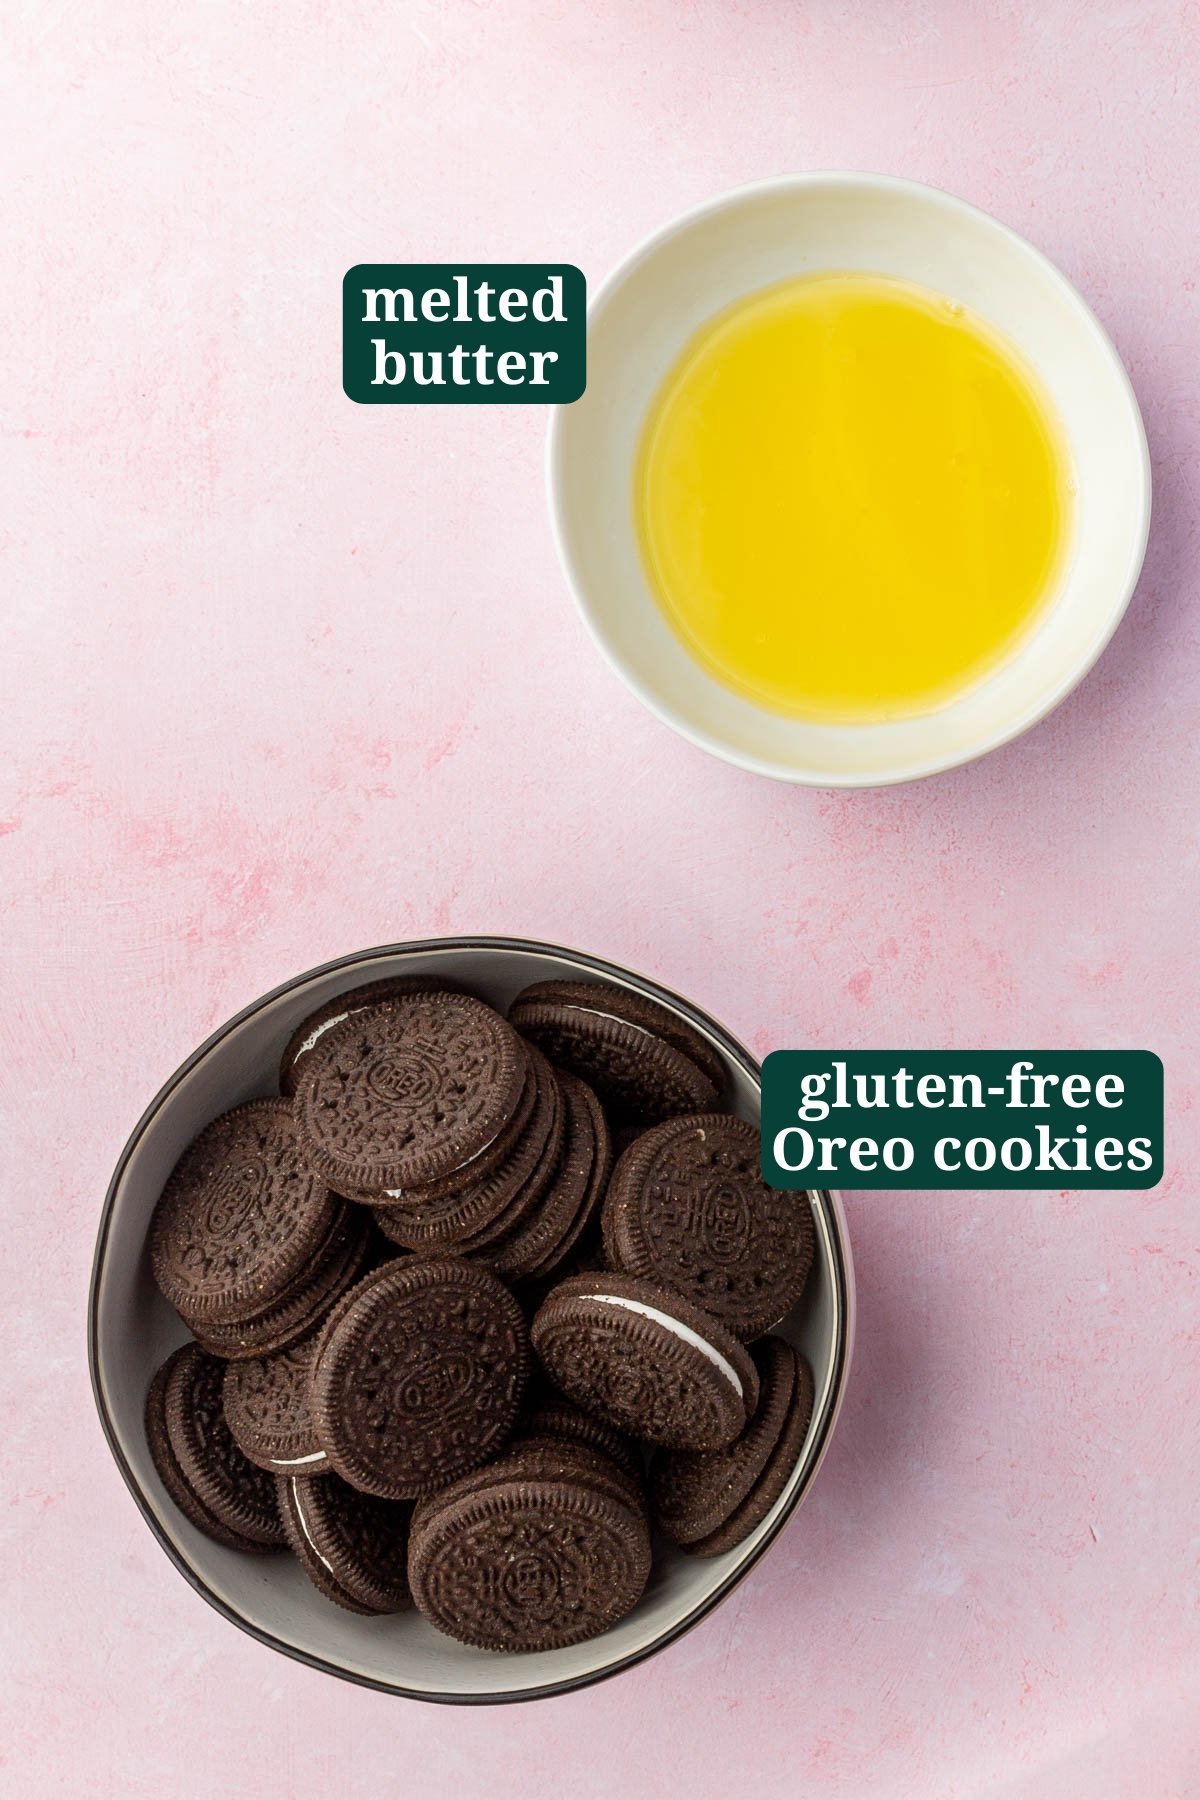 A bowl of gluten-free Oreos and a bowl of melted butter on a pink table.